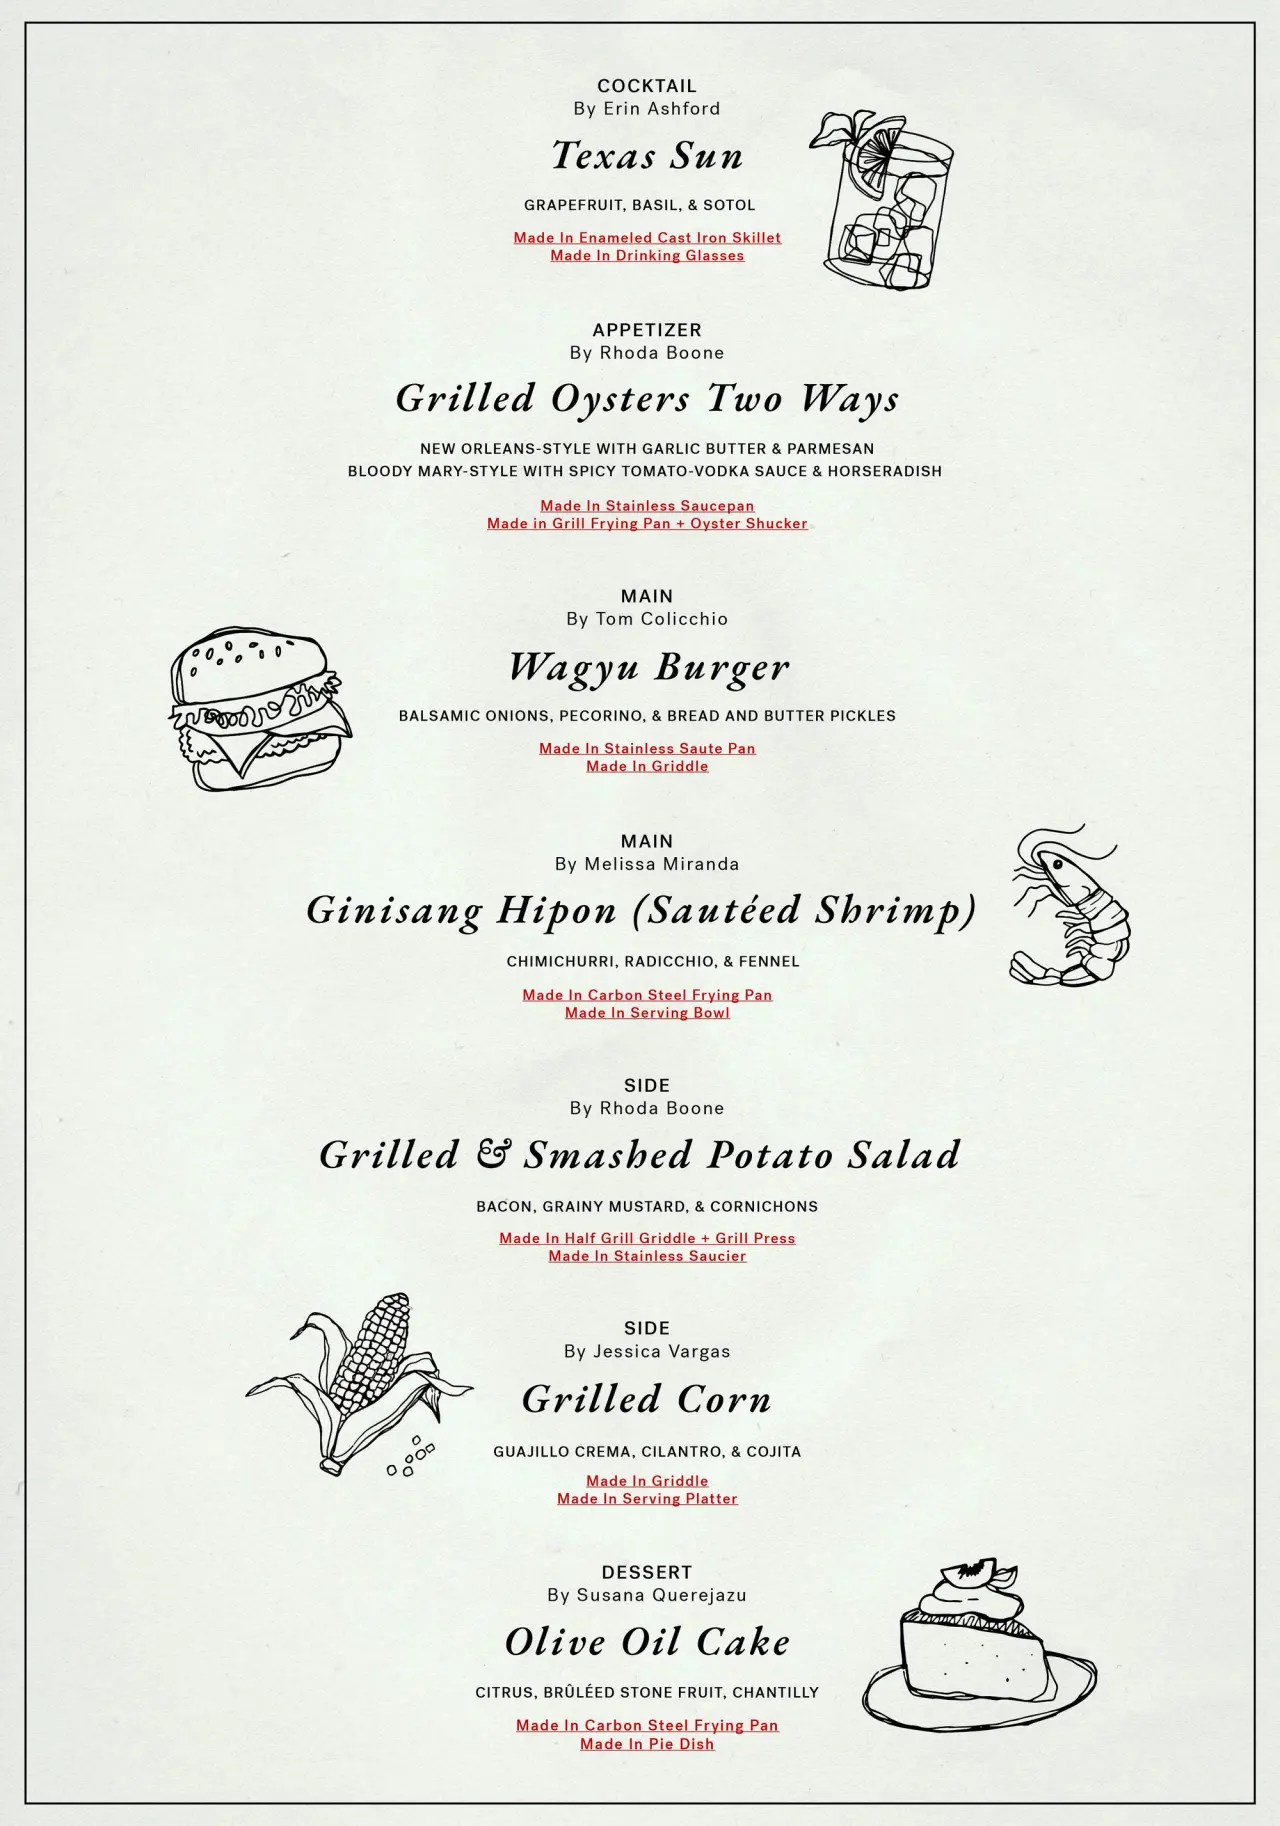 The image displays a menu featuring various dishes and drinks, each accompanied by hand-drawn illustrations, such as a cocktail, a burger, a shrimp, corn, and a cake.